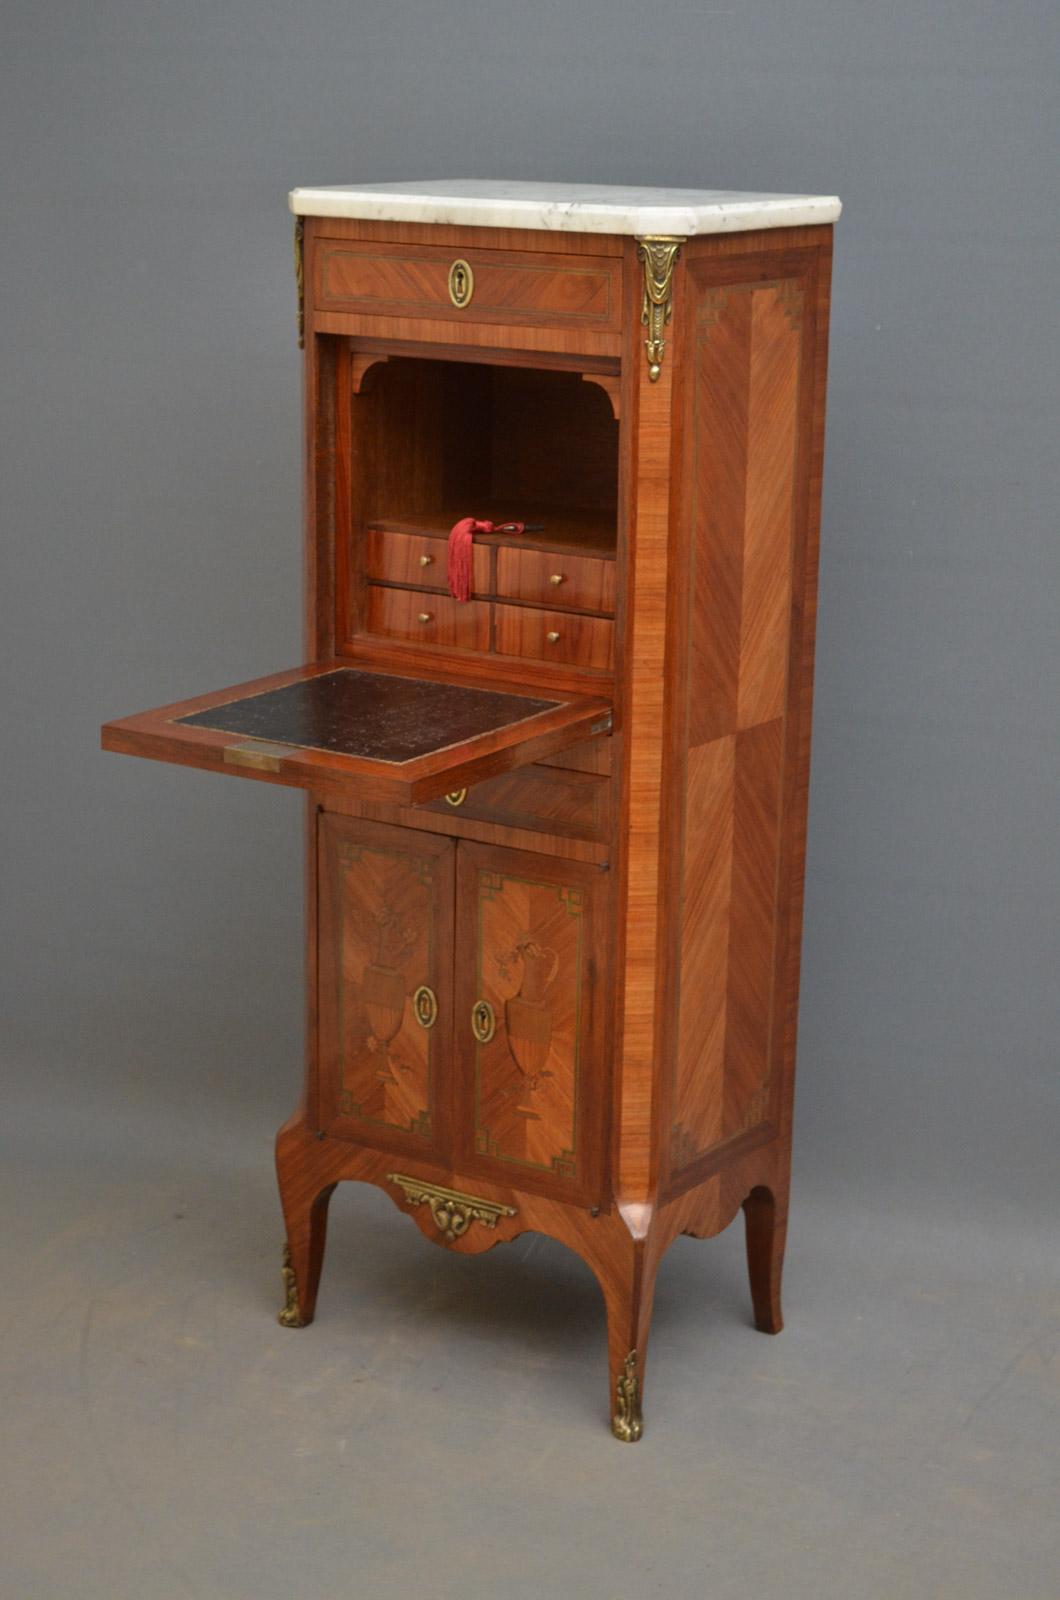 Sn3613 very unusual Continental inlaid cabinet with bookmatched quarter veneer sides, having white veined marble top above inlaid frieze drawer and fall front which opens to reveal small drawers and leather writing surface, inlaid drawer and a pair